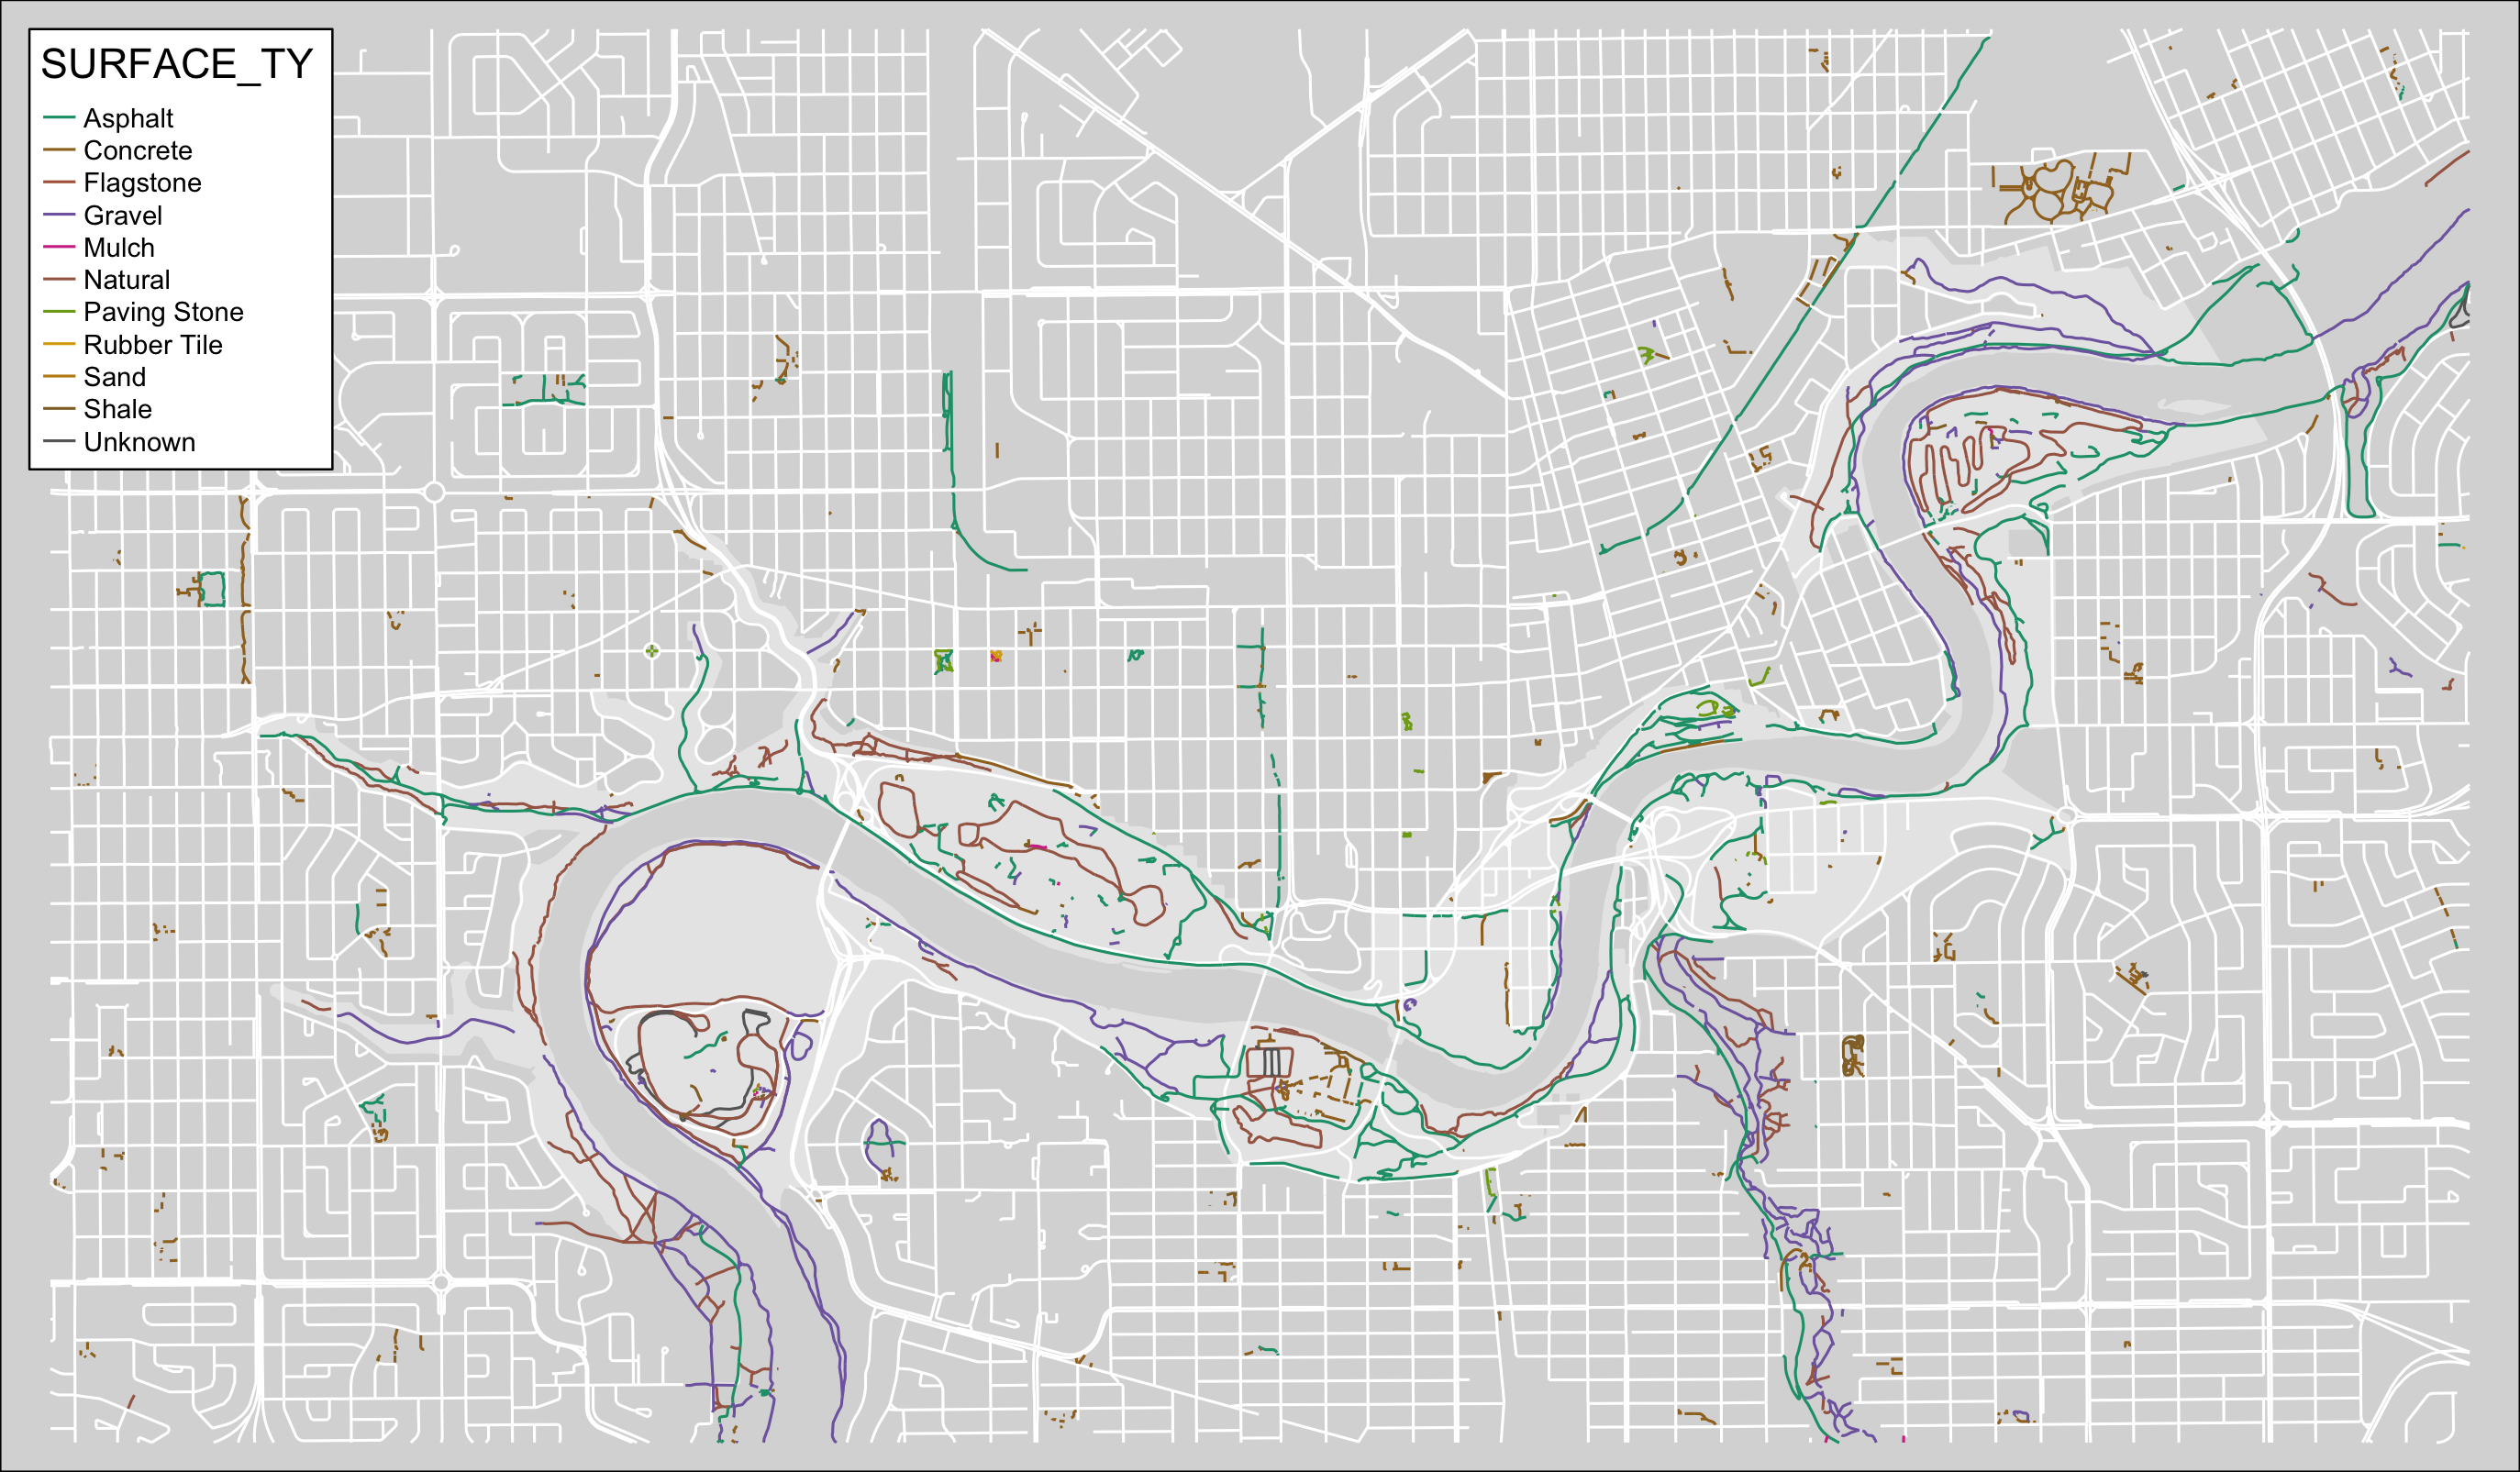 Map of trails in Edmonton by surface type.